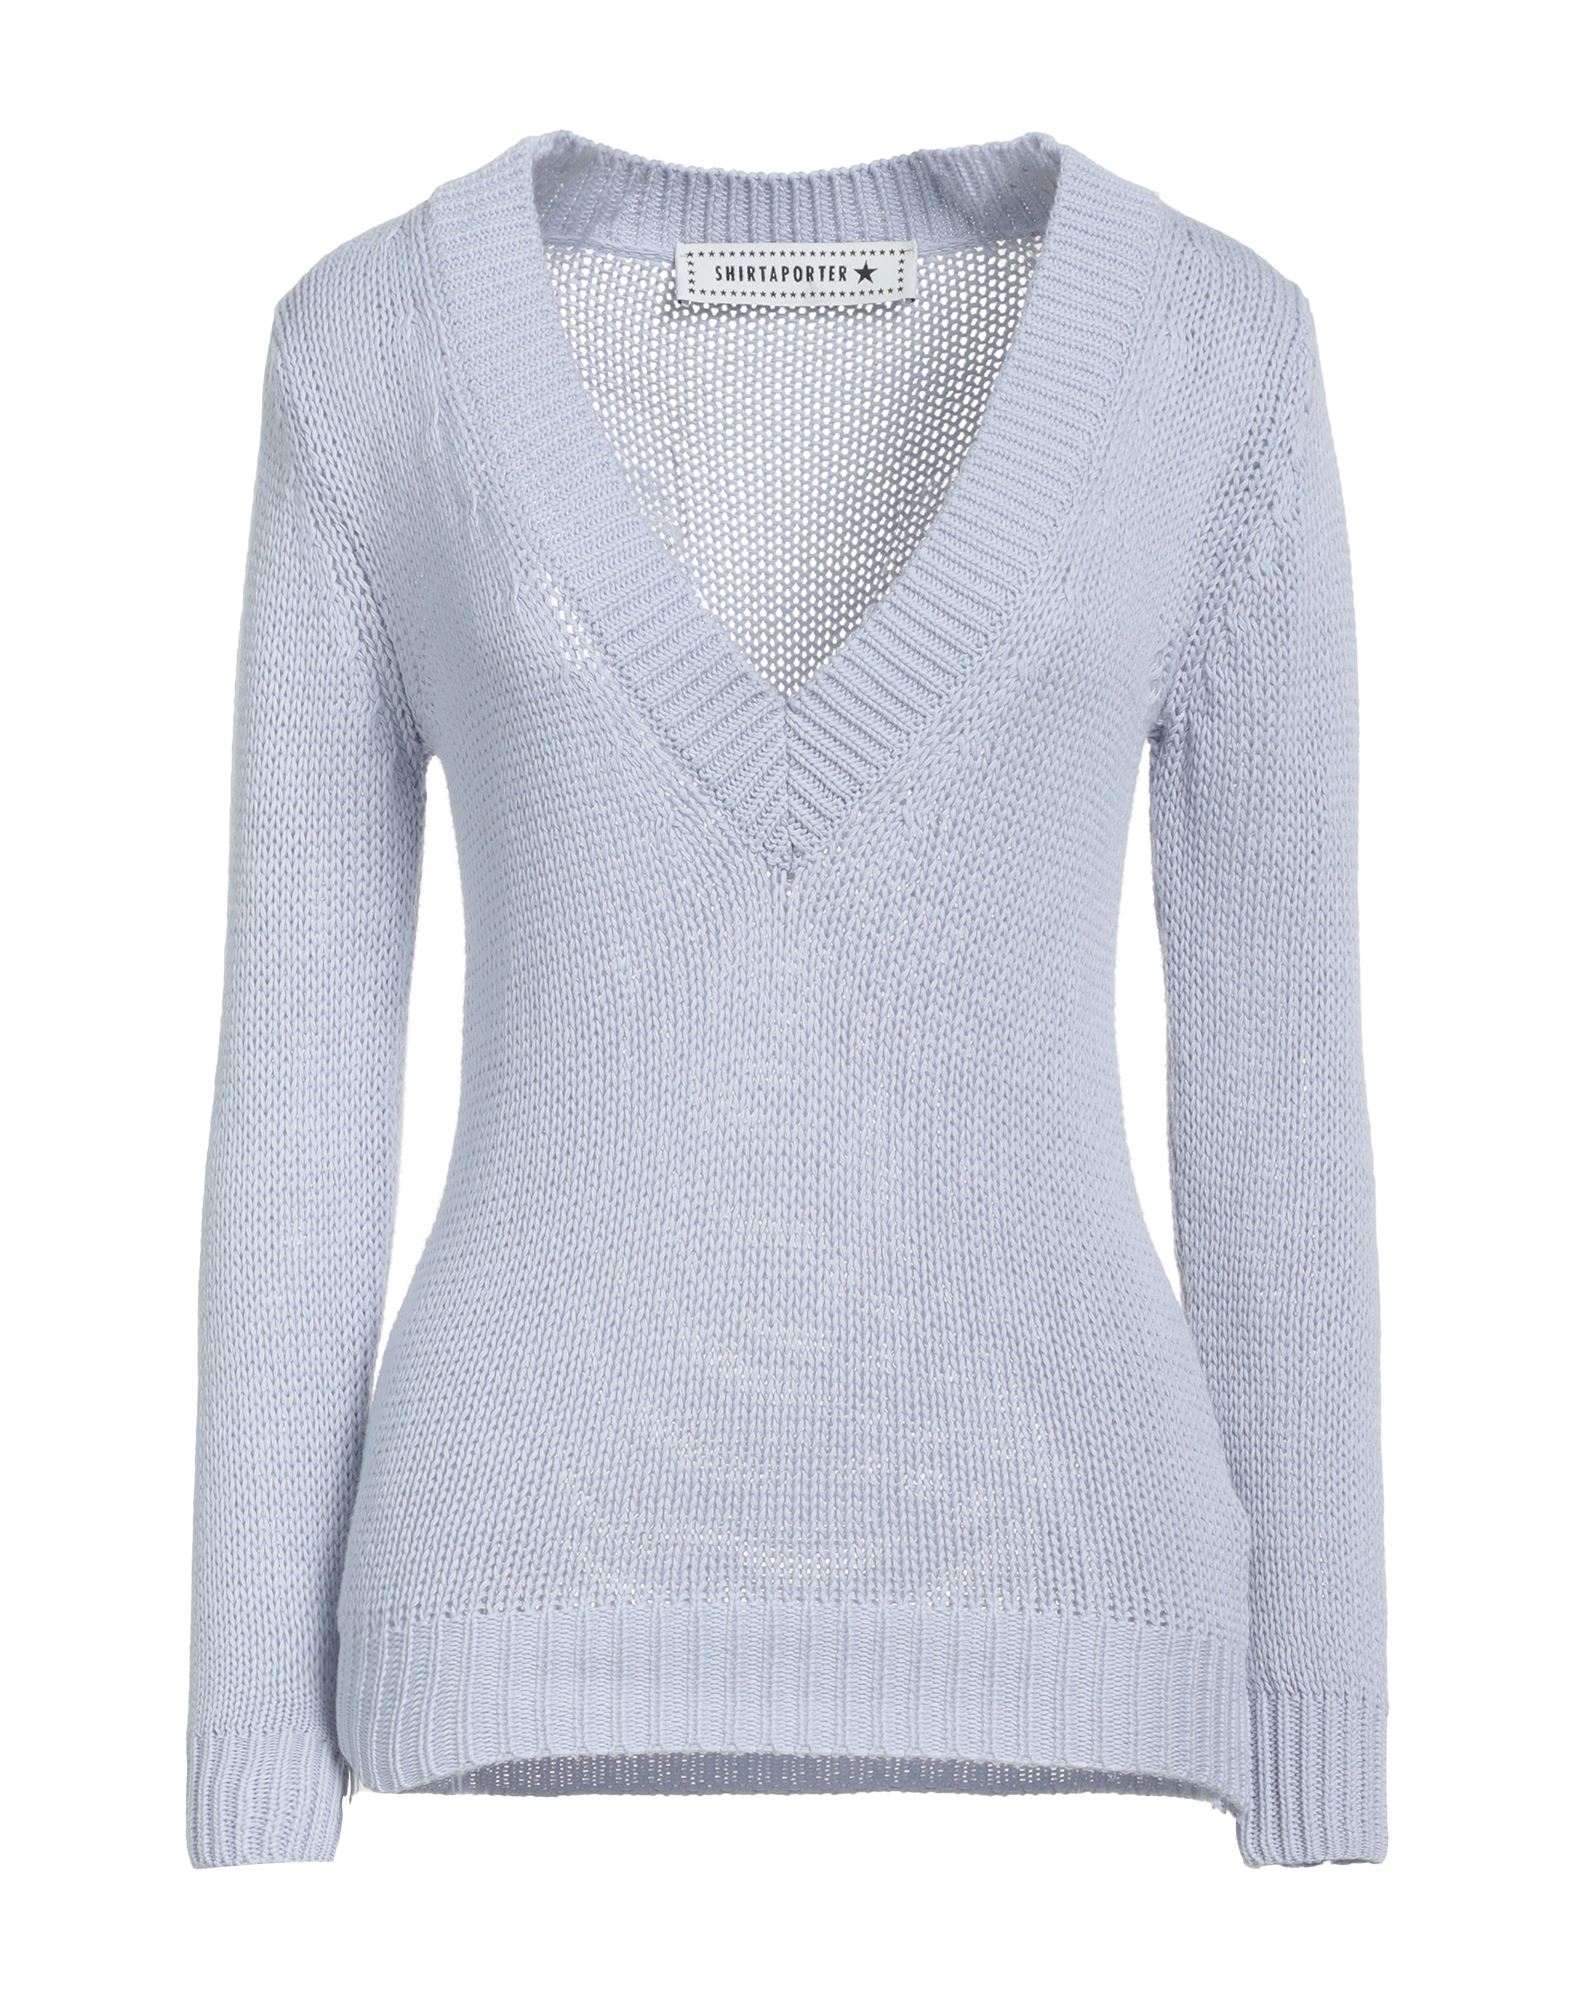 Shirtaporter Sweaters In Purple